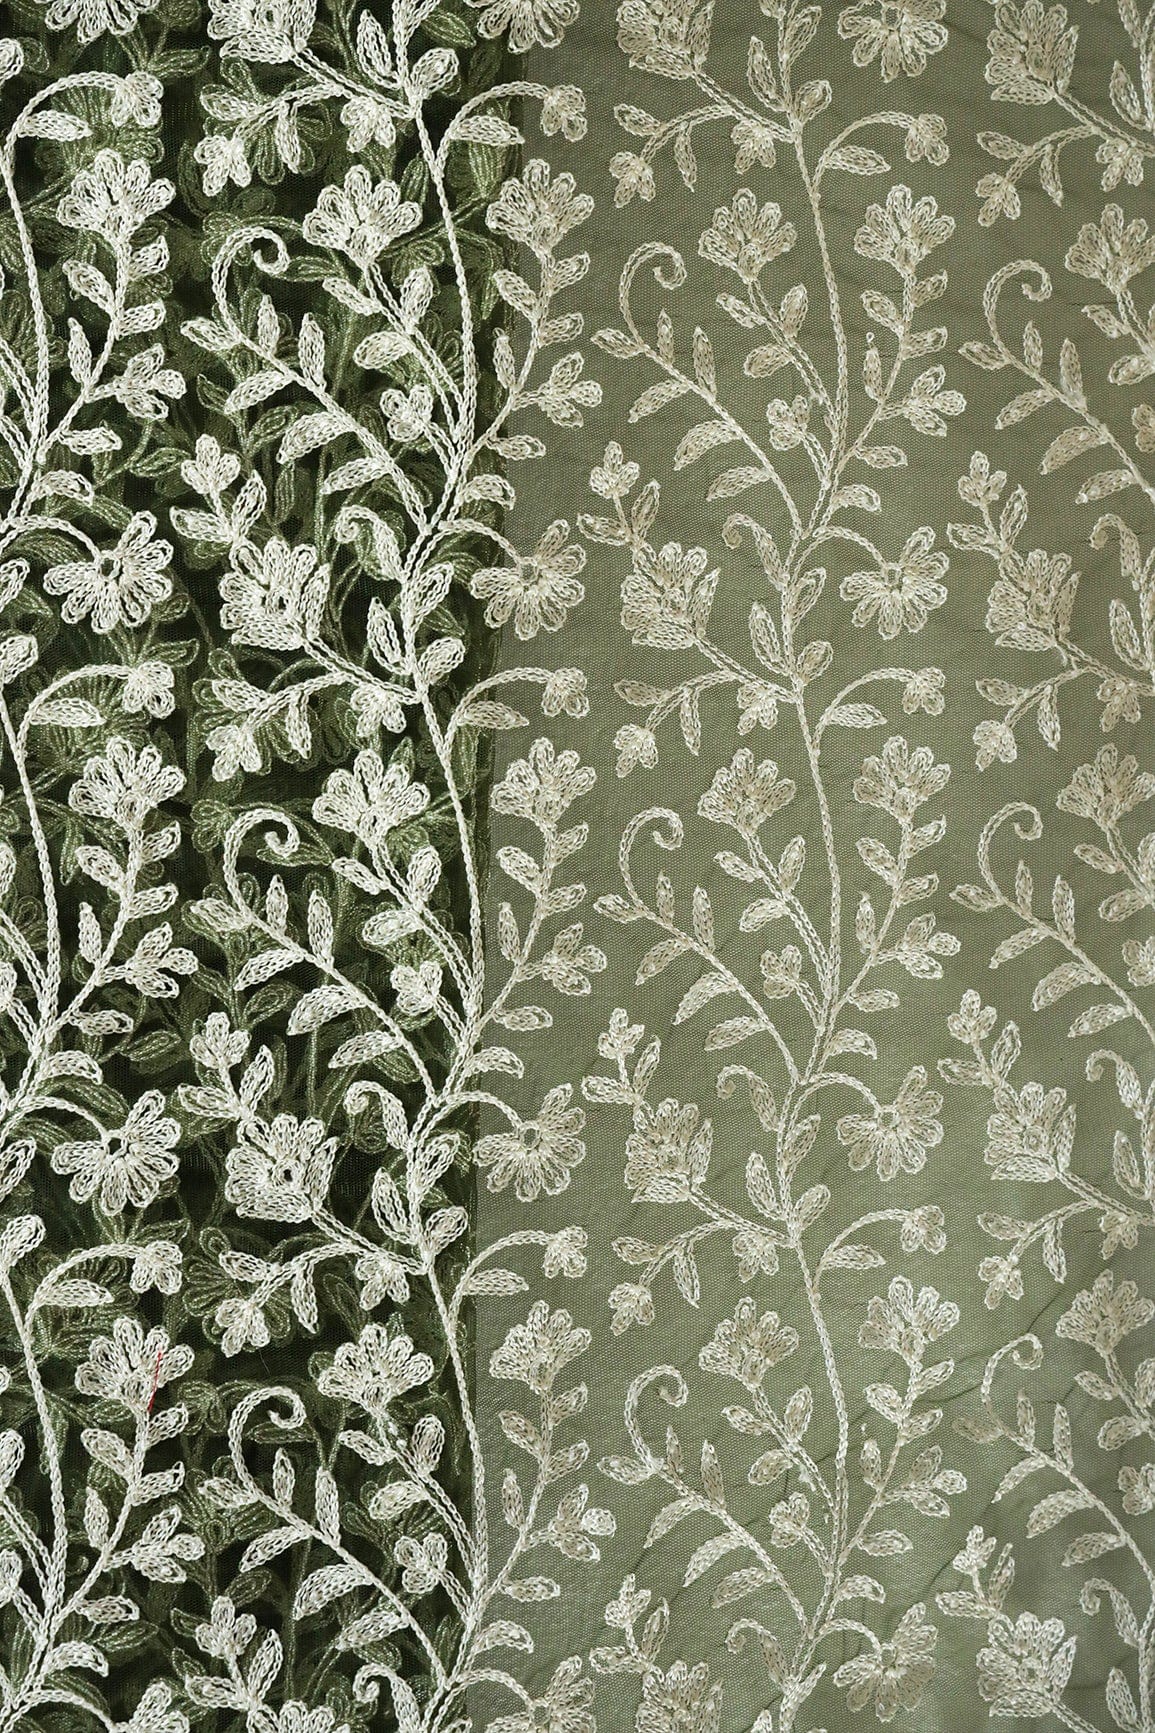 doeraa Embroidery Fabrics Beautiful White Thread Floral Embroidery On Dark Olive Soft Net Fabric